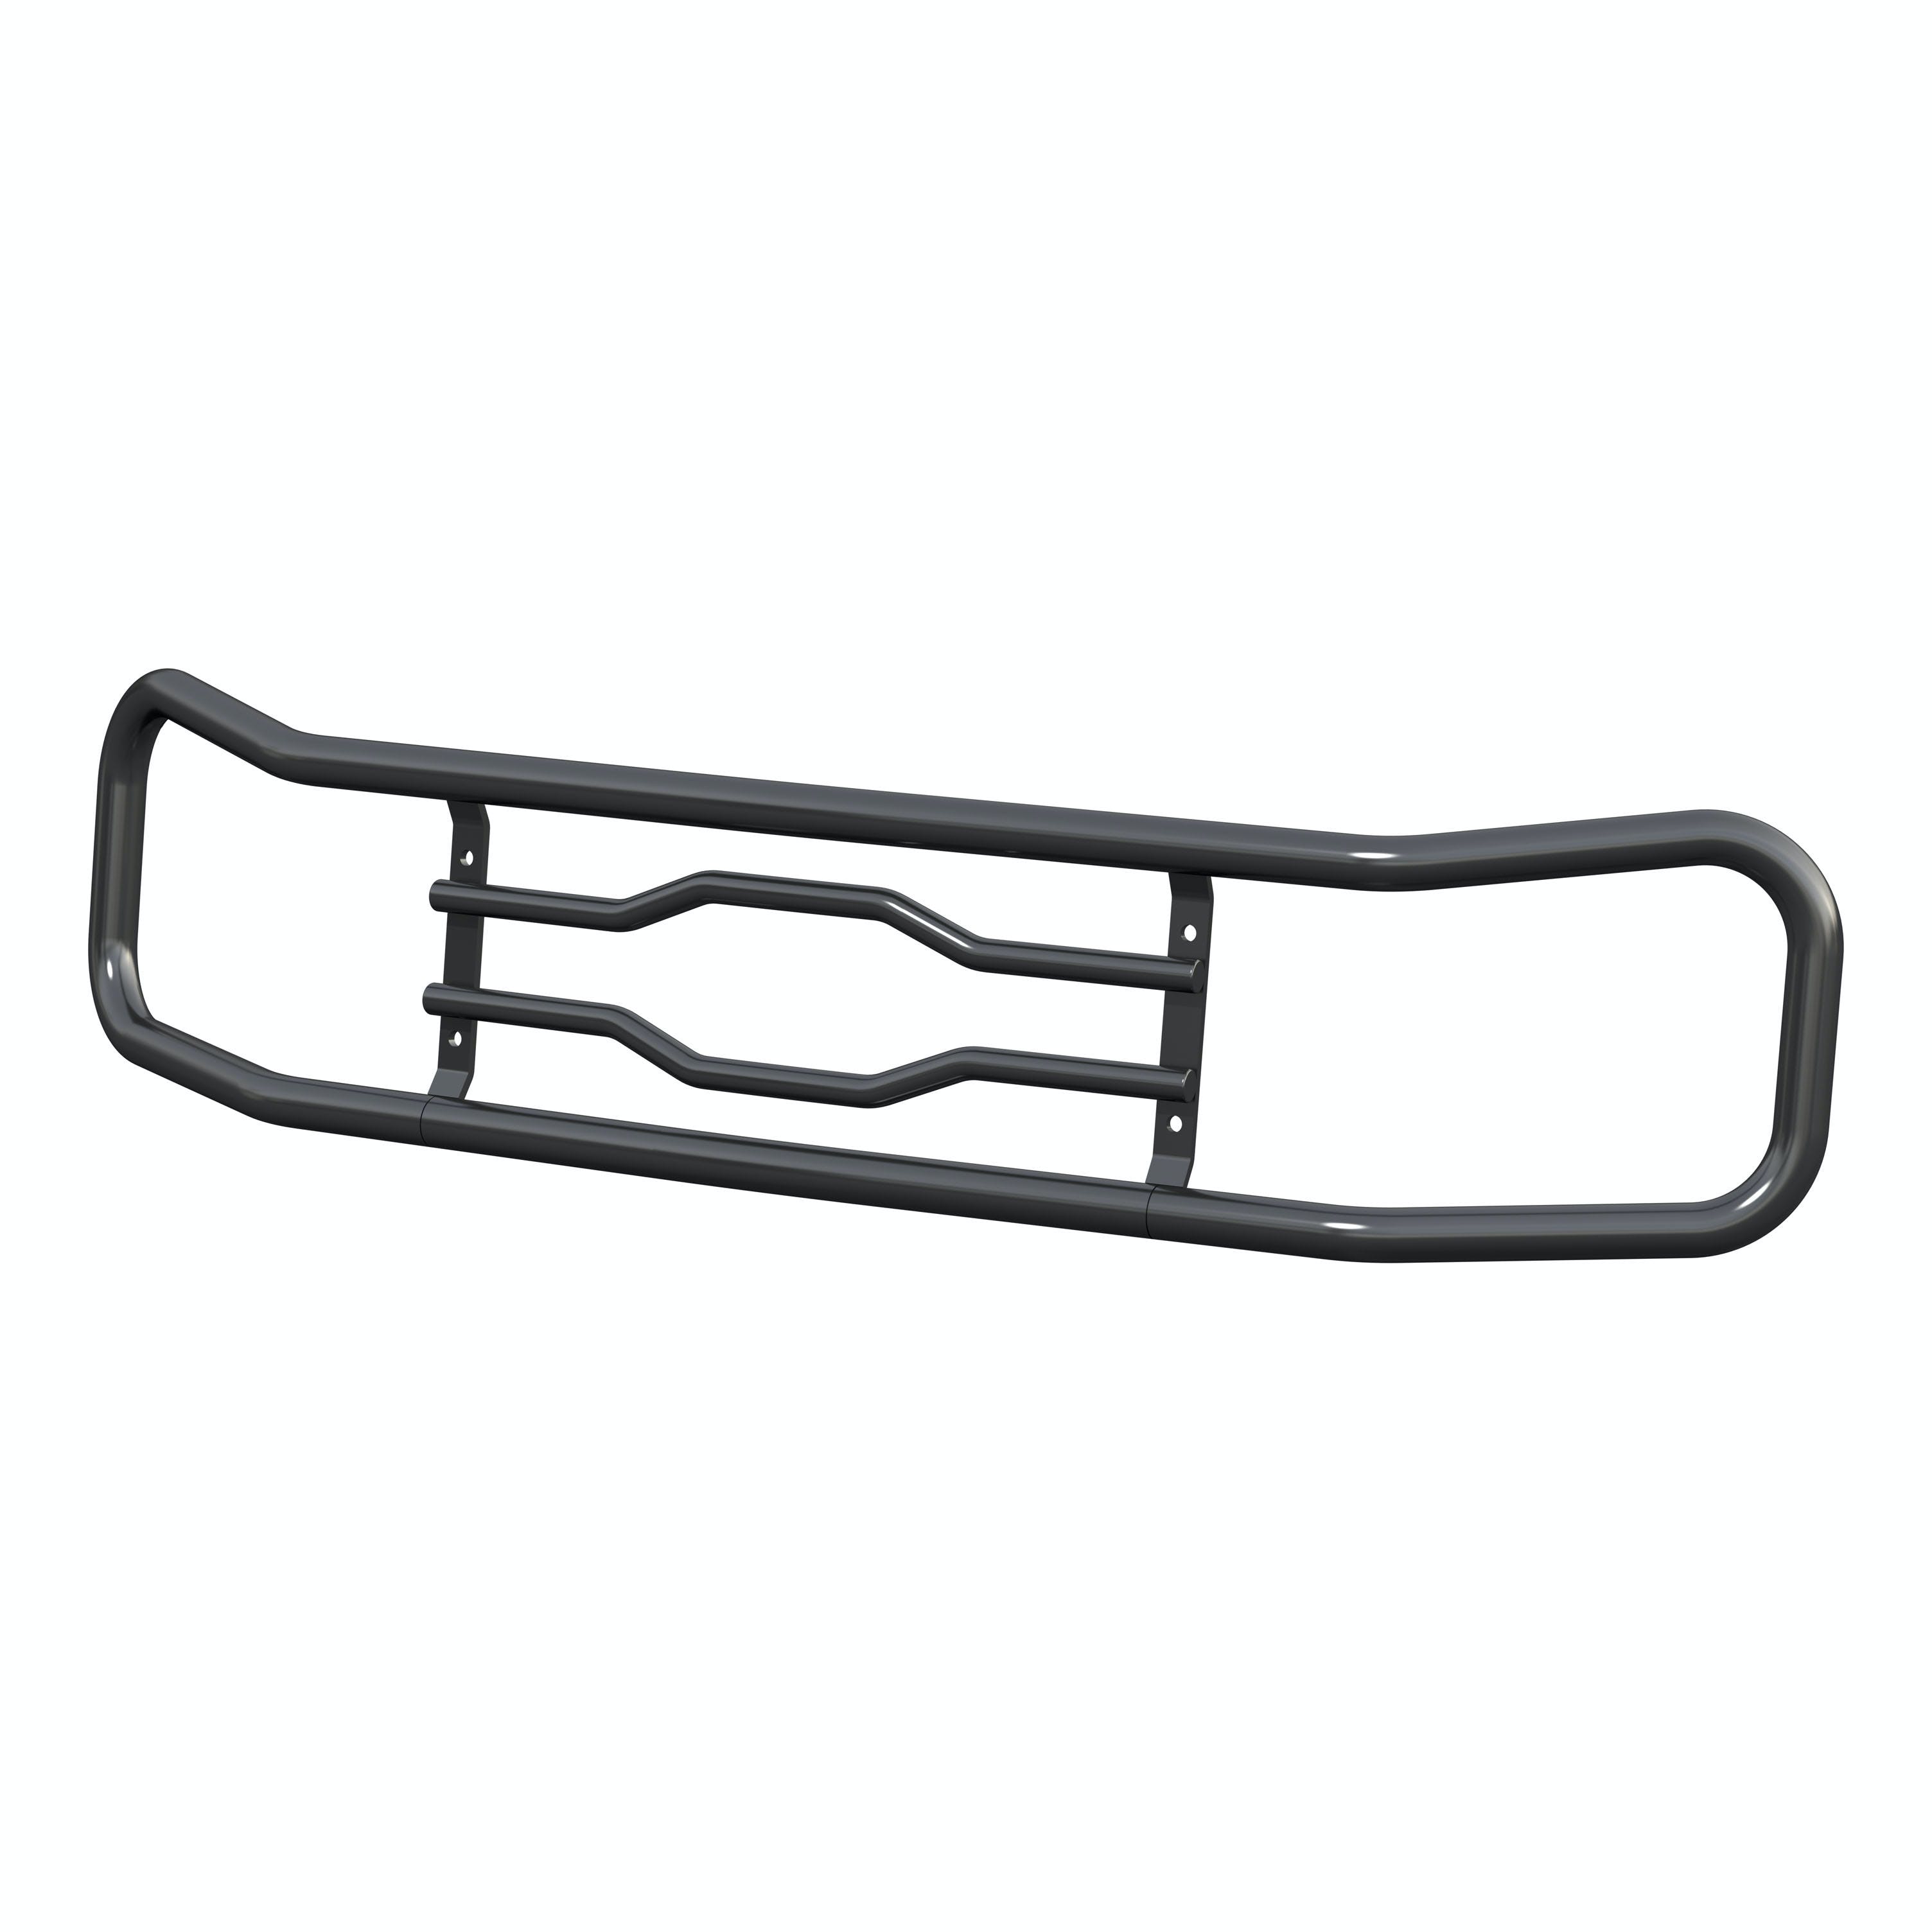 LUVERNE 340719 2 inch Tubular Grille Guard Ring Assembly